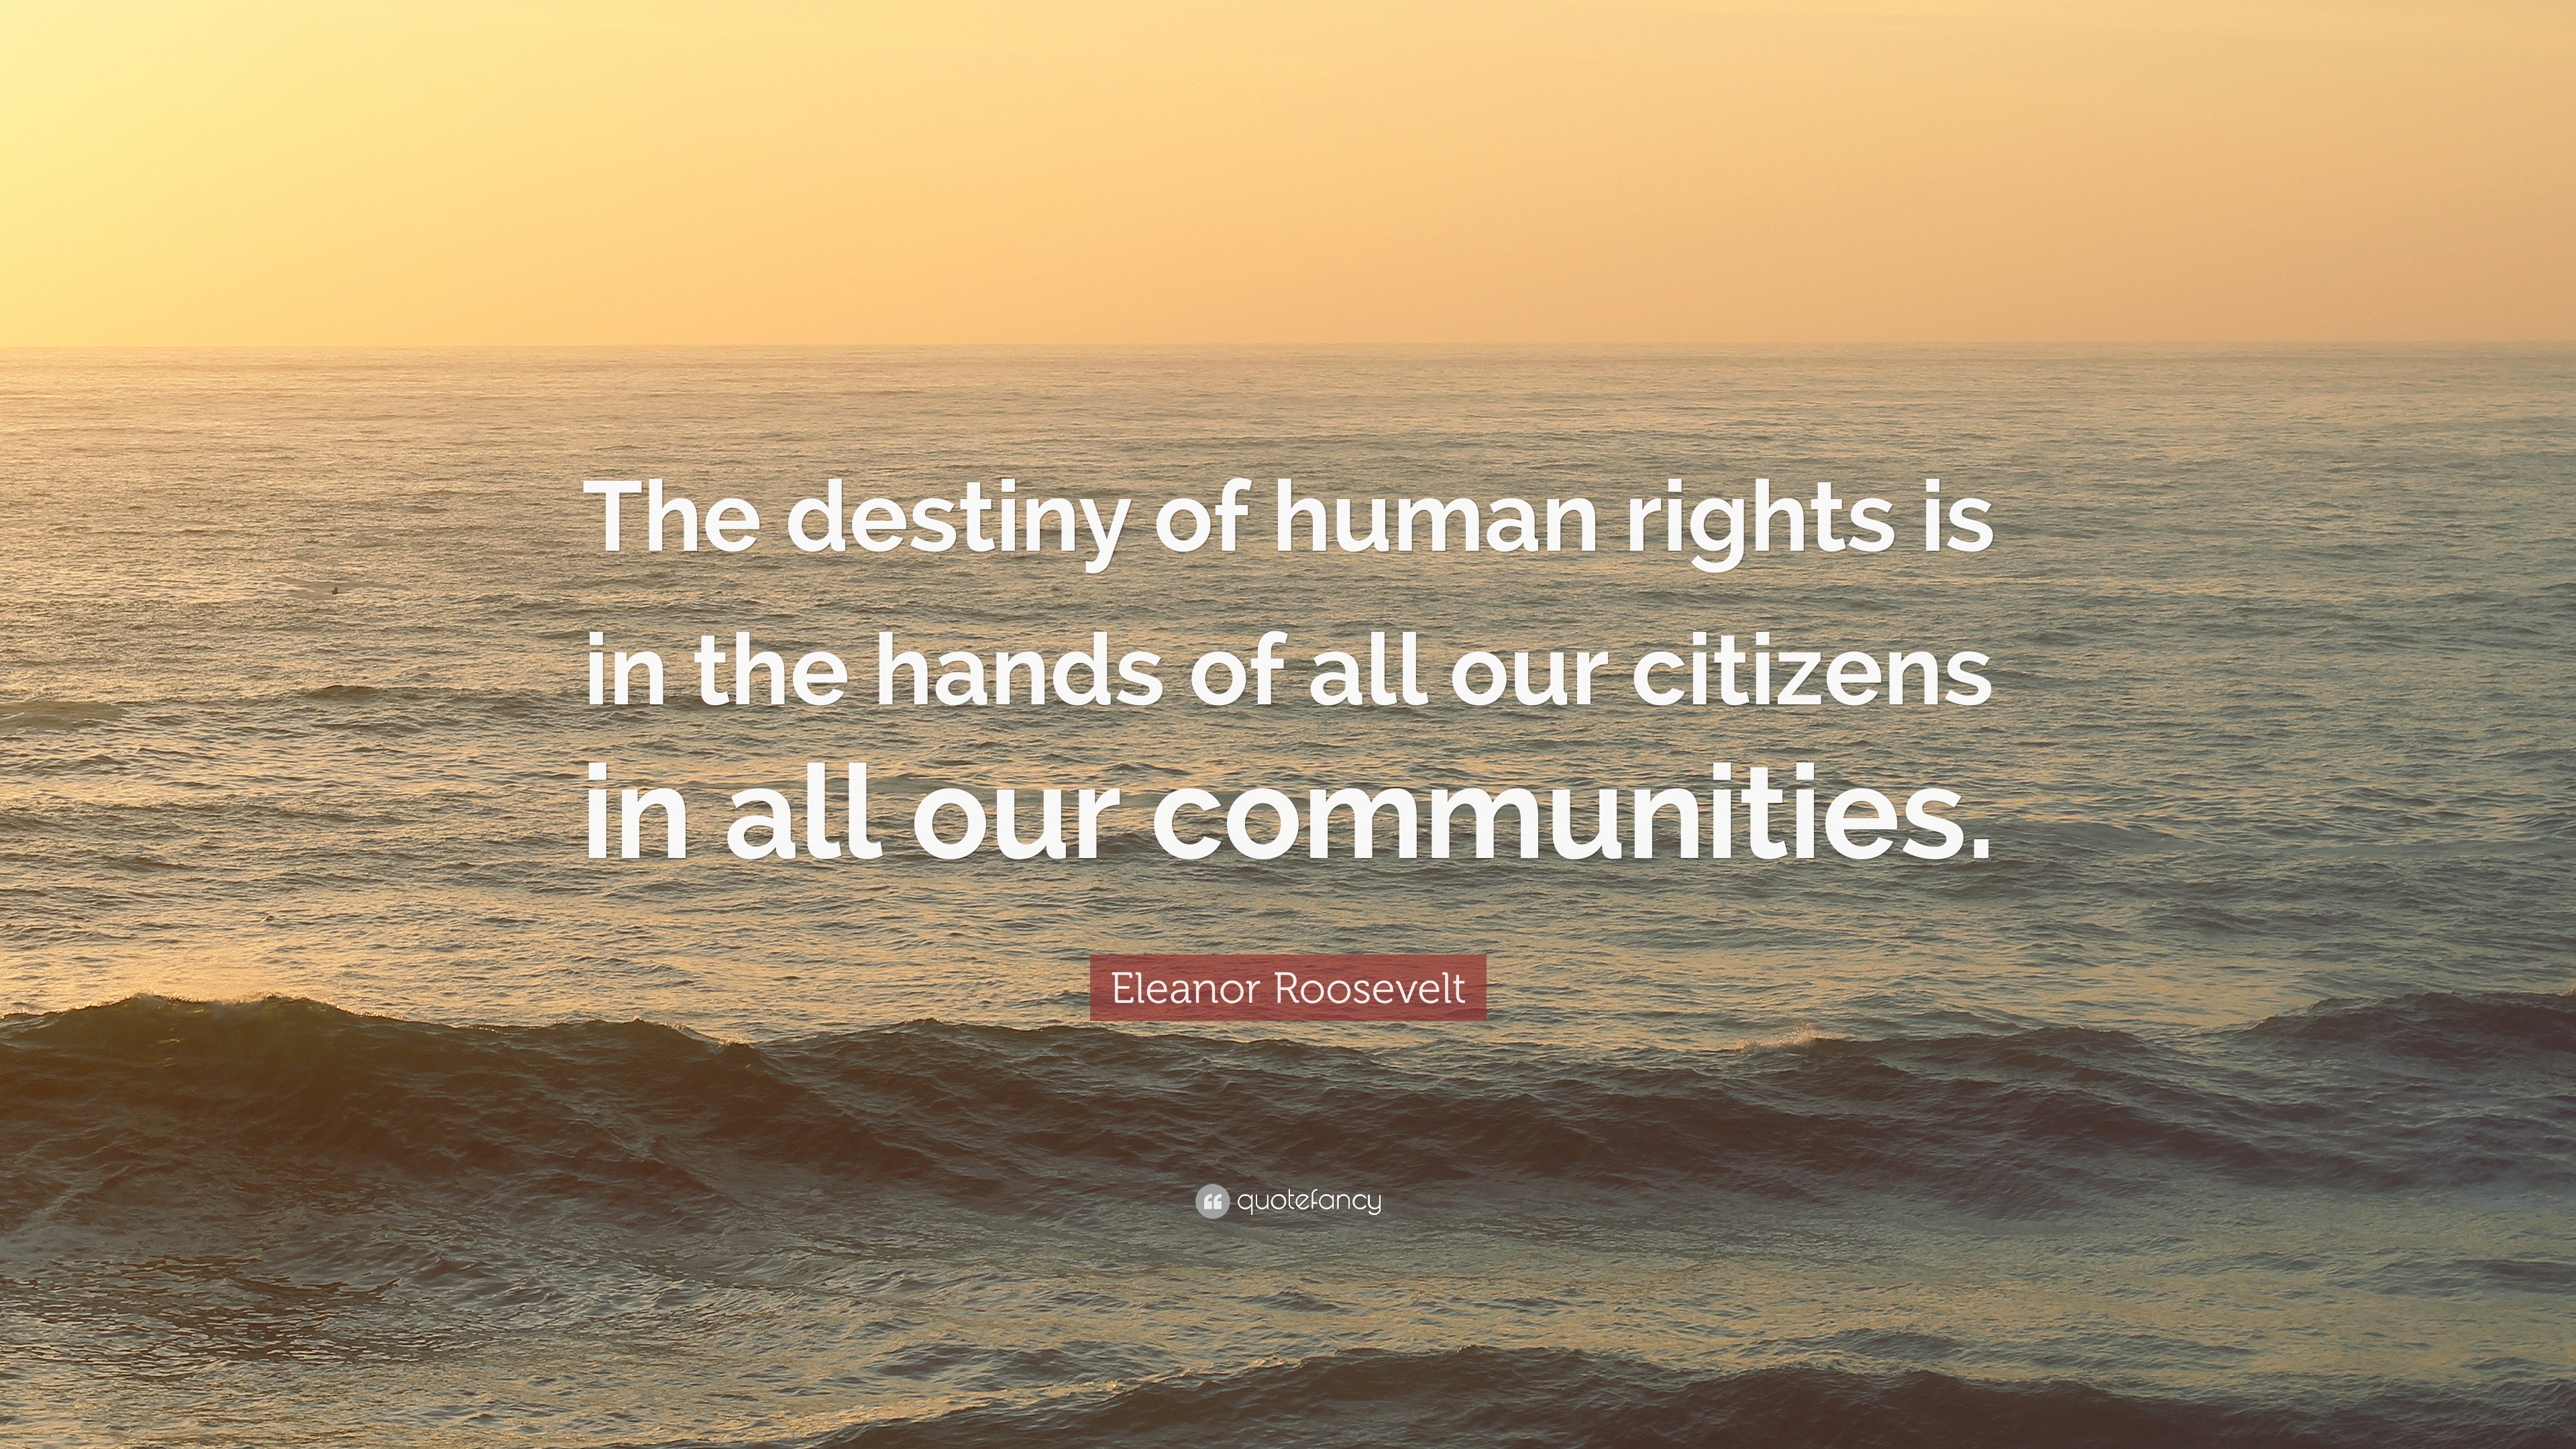 Eleanor Roosevelt Quote: “The destiny of human rights is in the hands